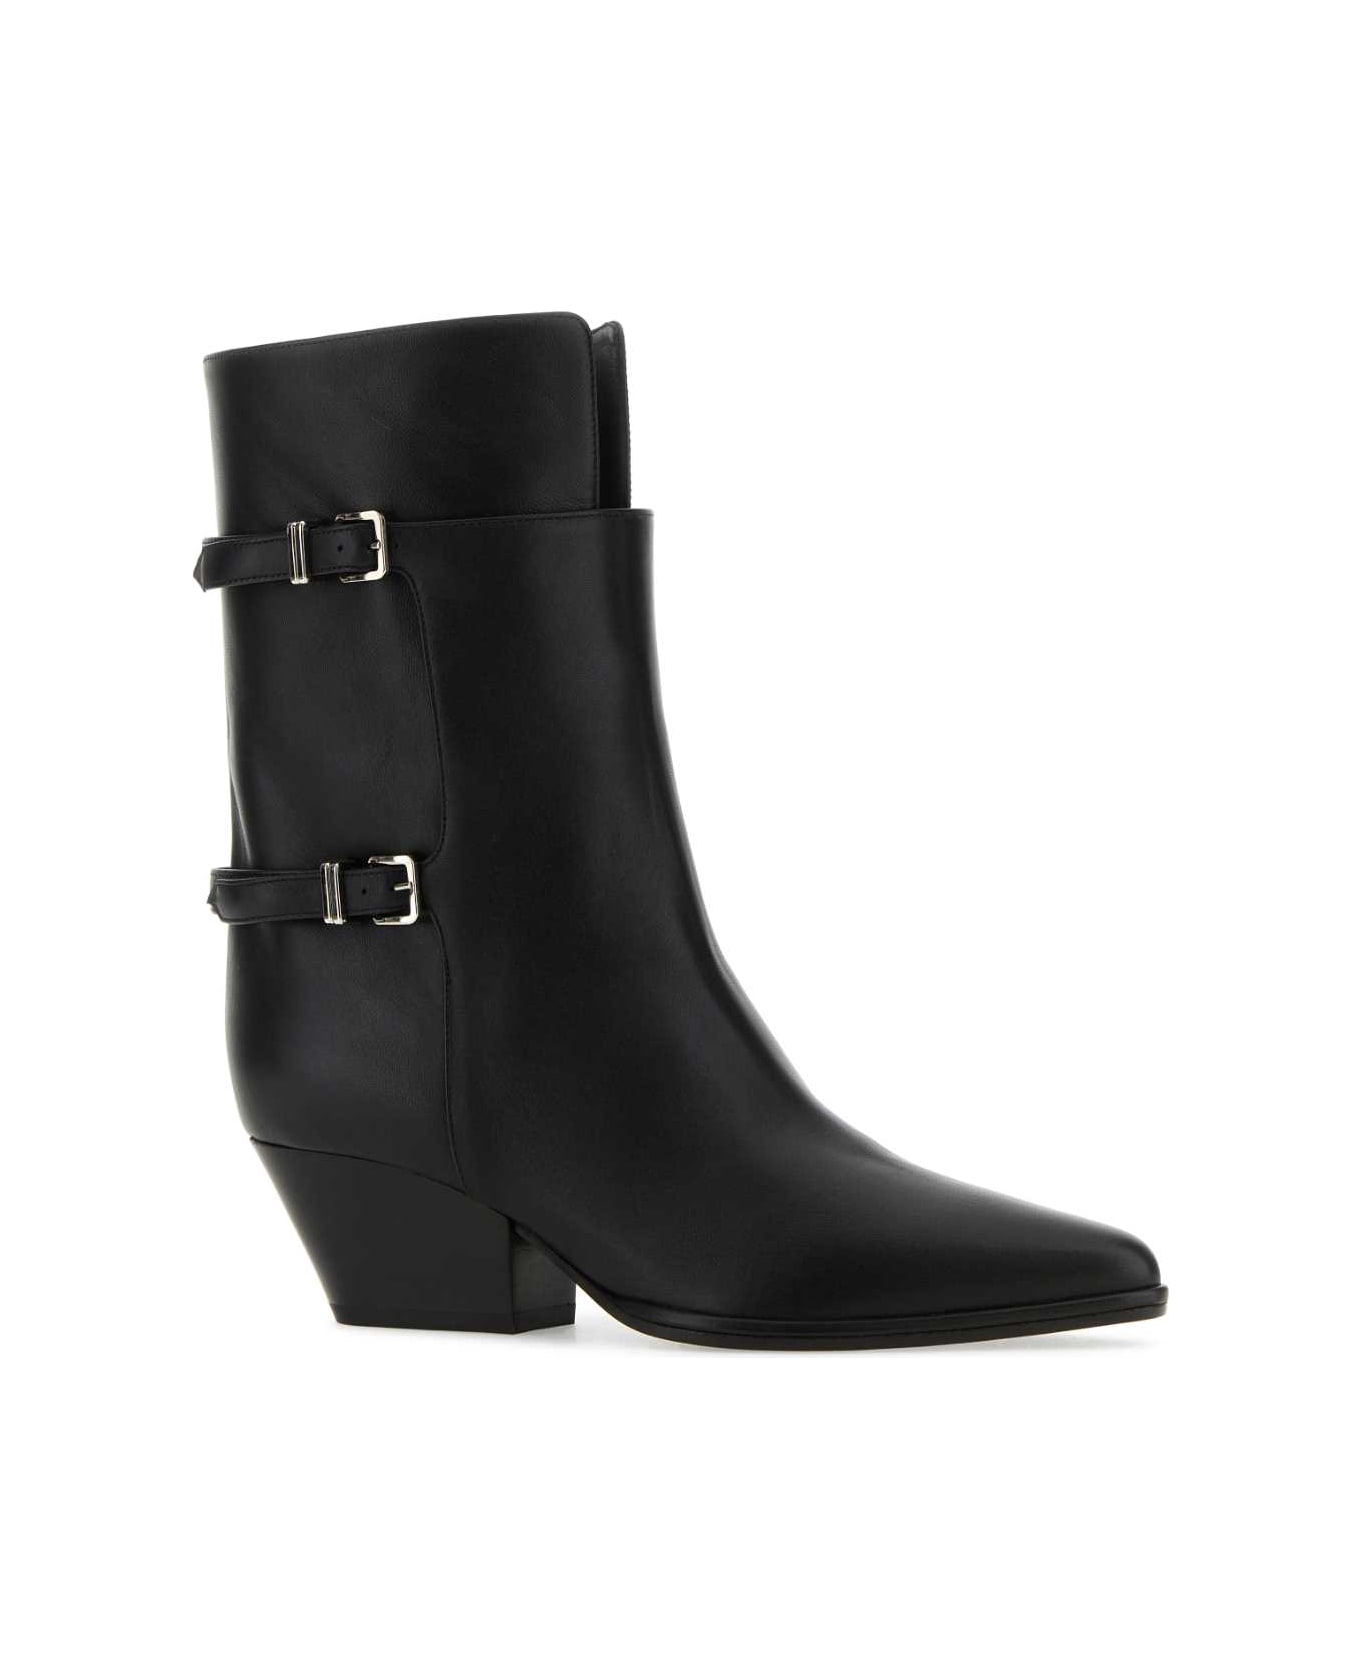 Sergio Rossi Black Leather Thalestris Ankle Boots - 1000 ブーツ